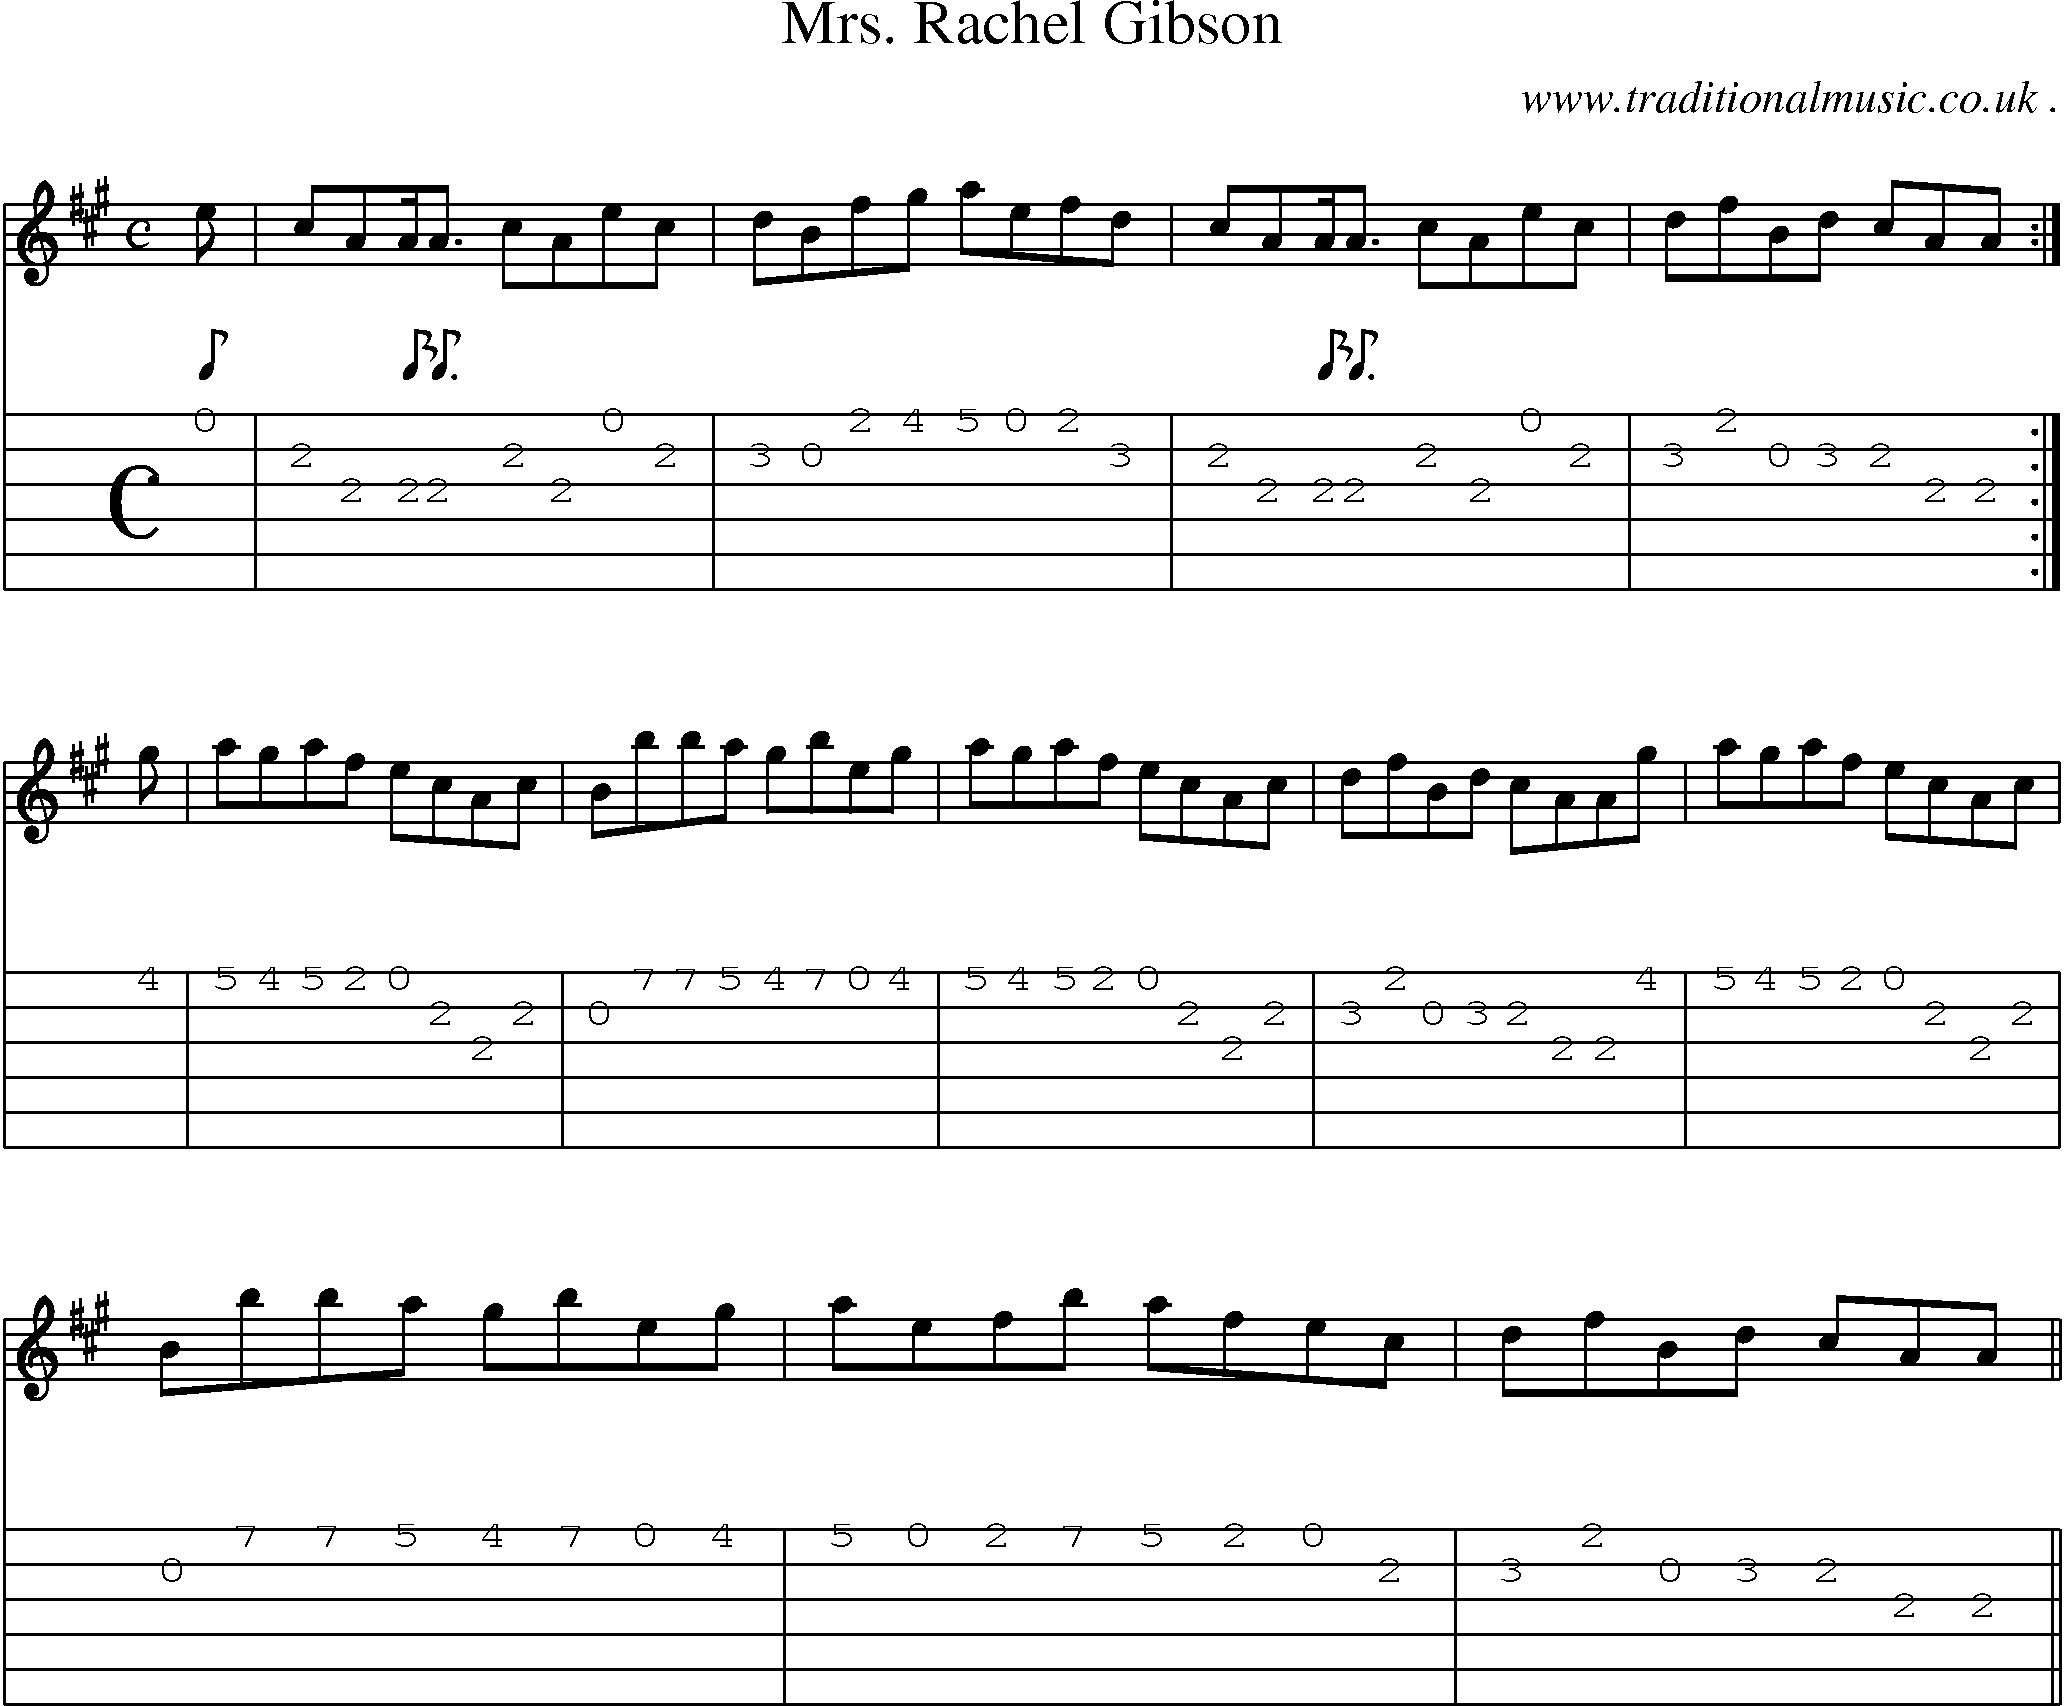 Sheet-music  score, Chords and Guitar Tabs for Mrs Rachel Gibson